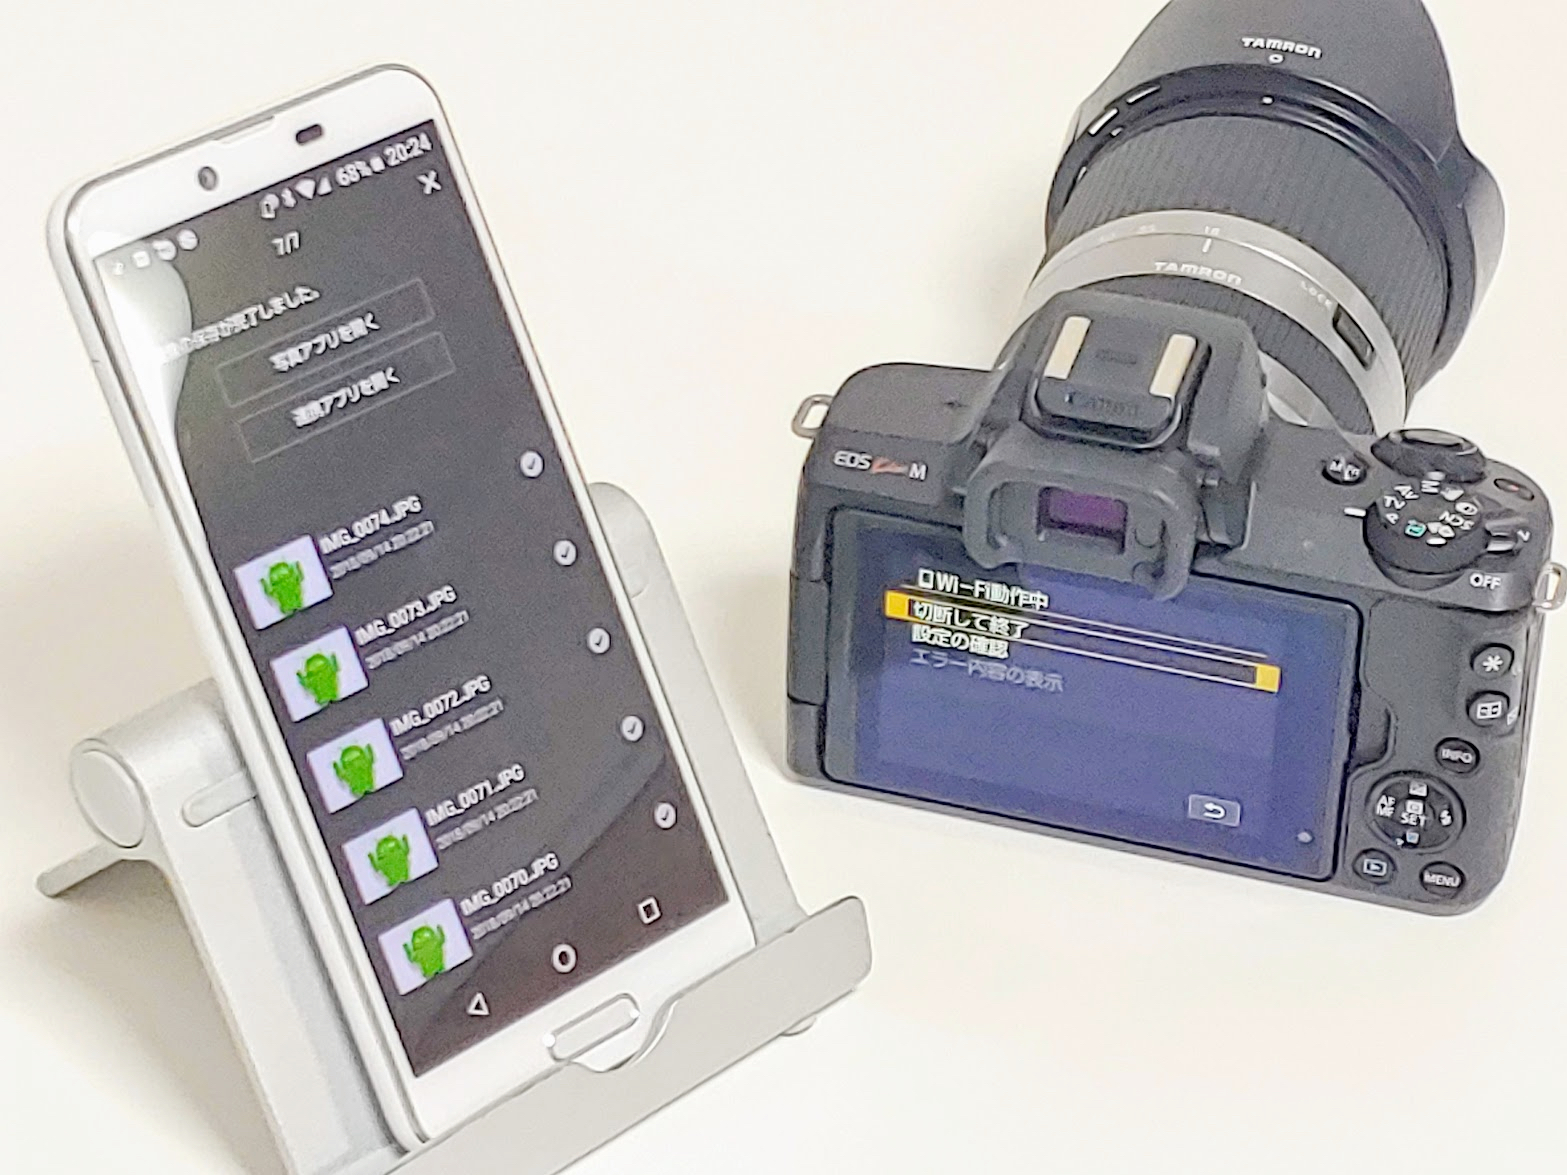 EOS Kiss MのスマホWi-Fi自動転送はとても便利 | juggly.cn